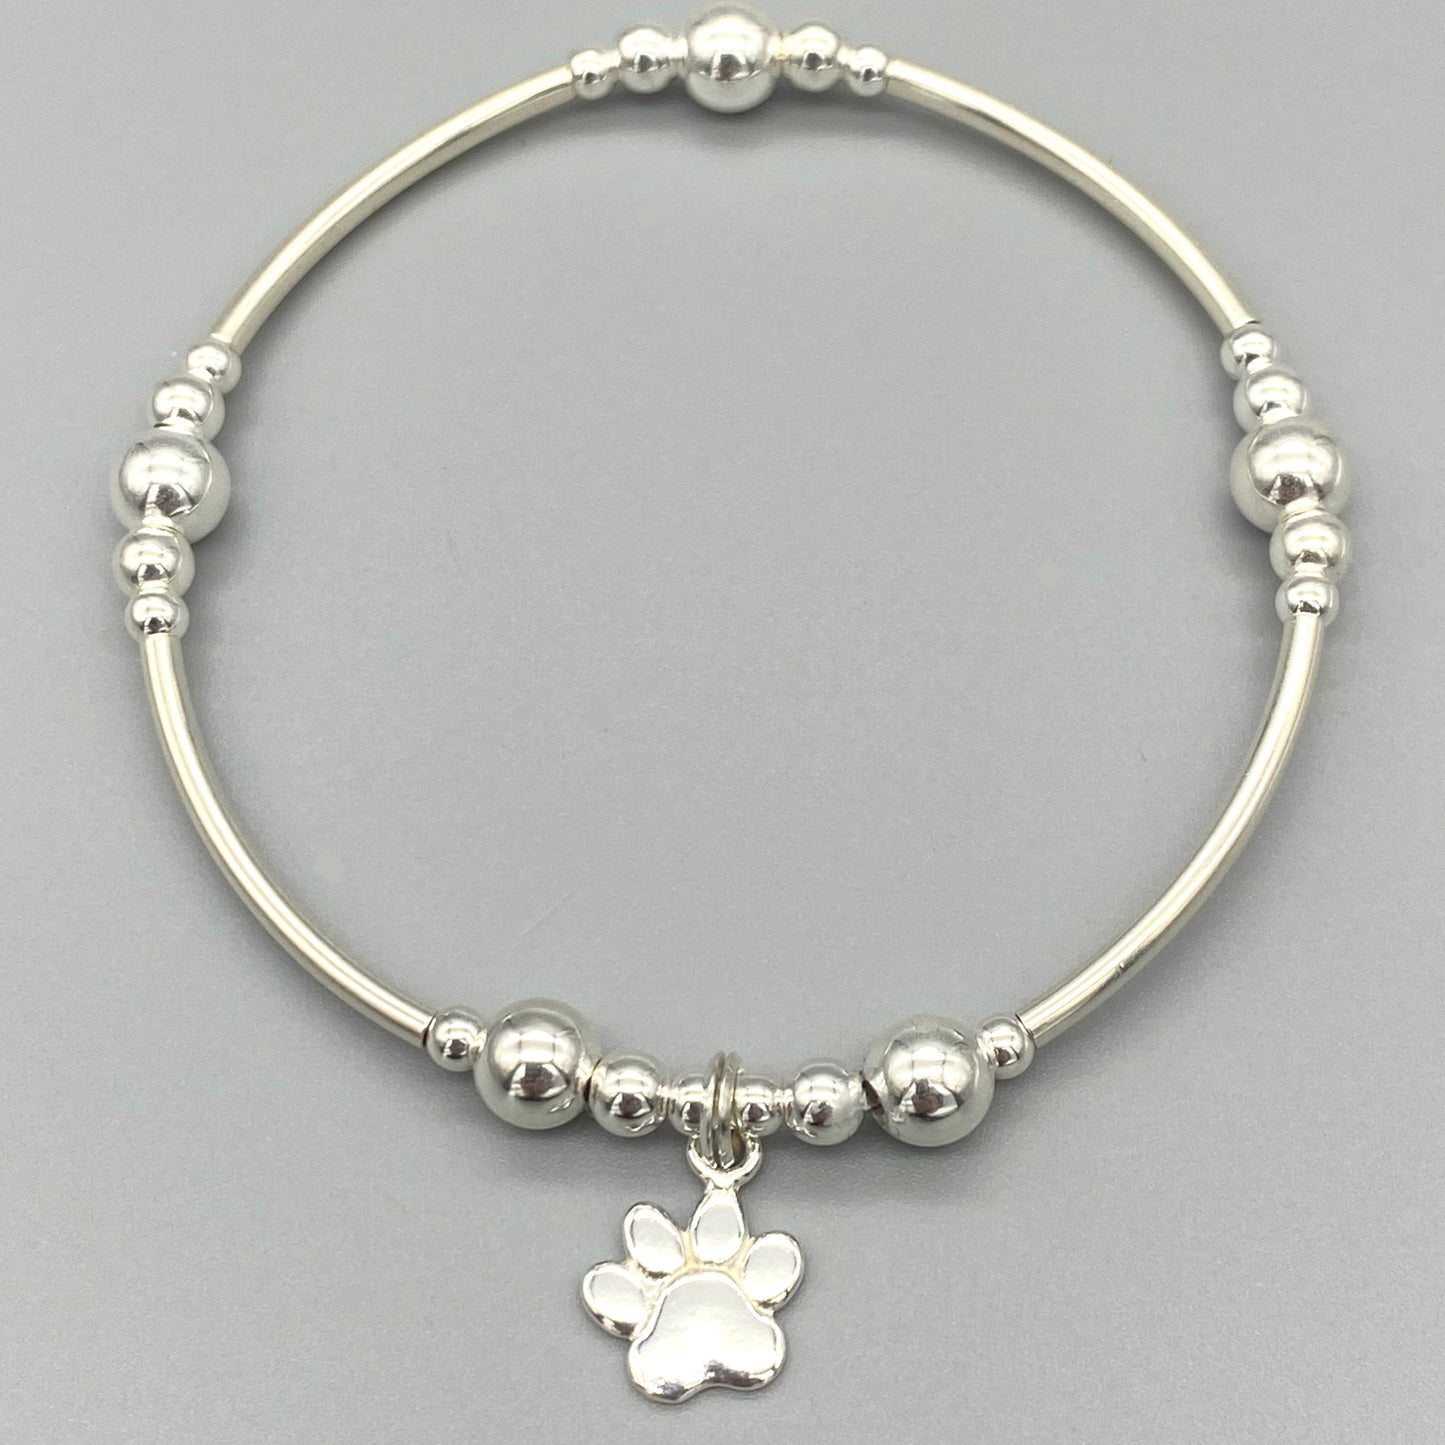 Dog paw charm women's sterling silver stacking bracelet by My Silver Wish